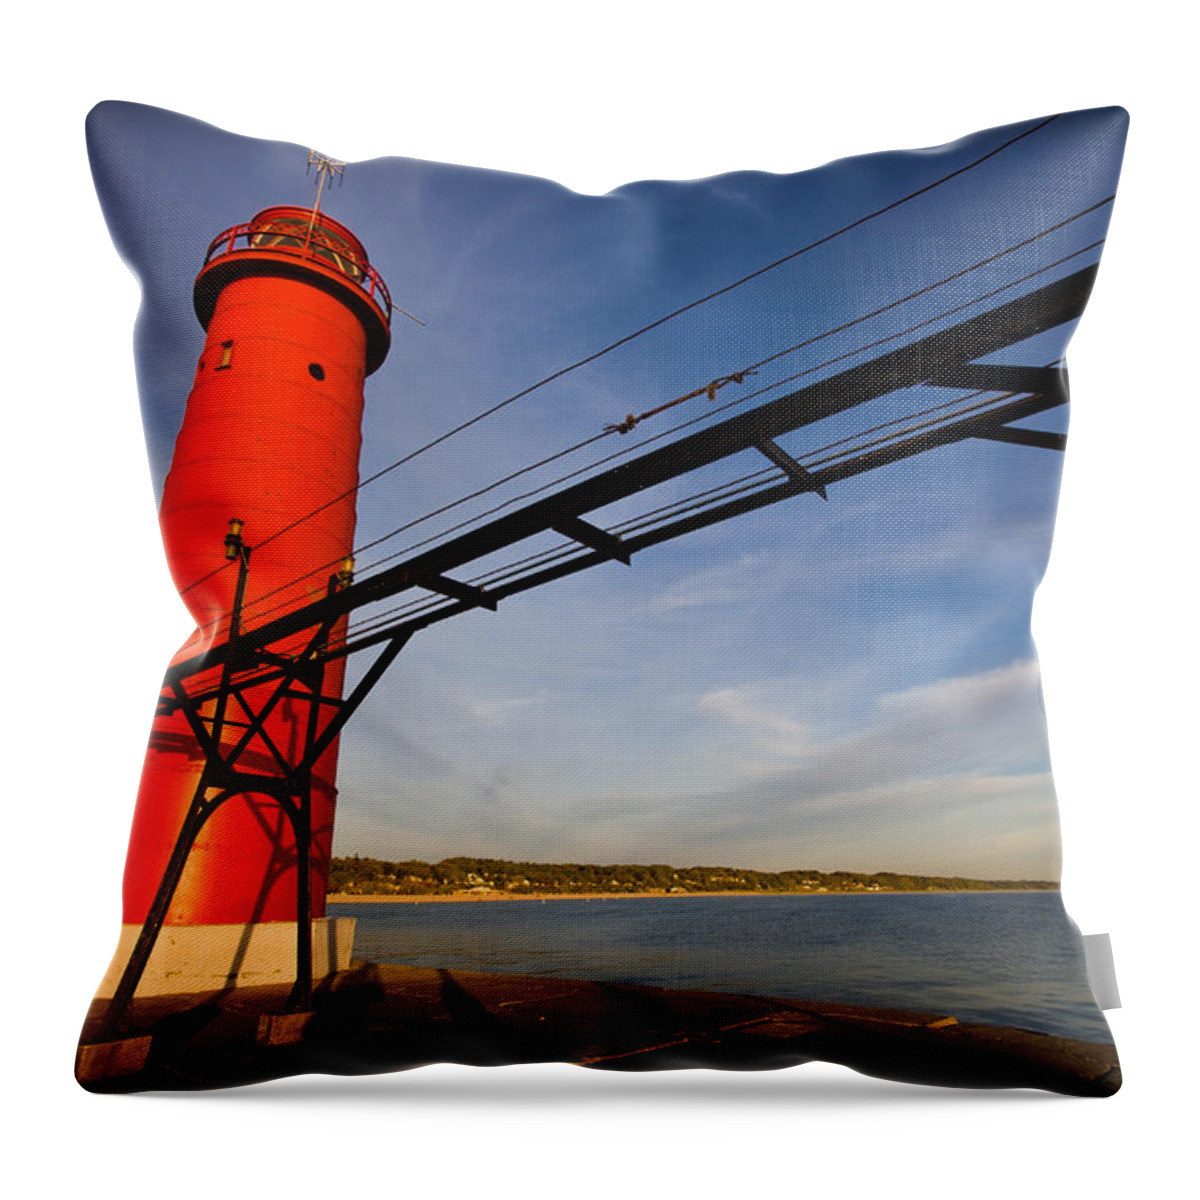 3scape Throw Pillow featuring the photograph Grand Haven Lighthouse by Adam Romanowicz